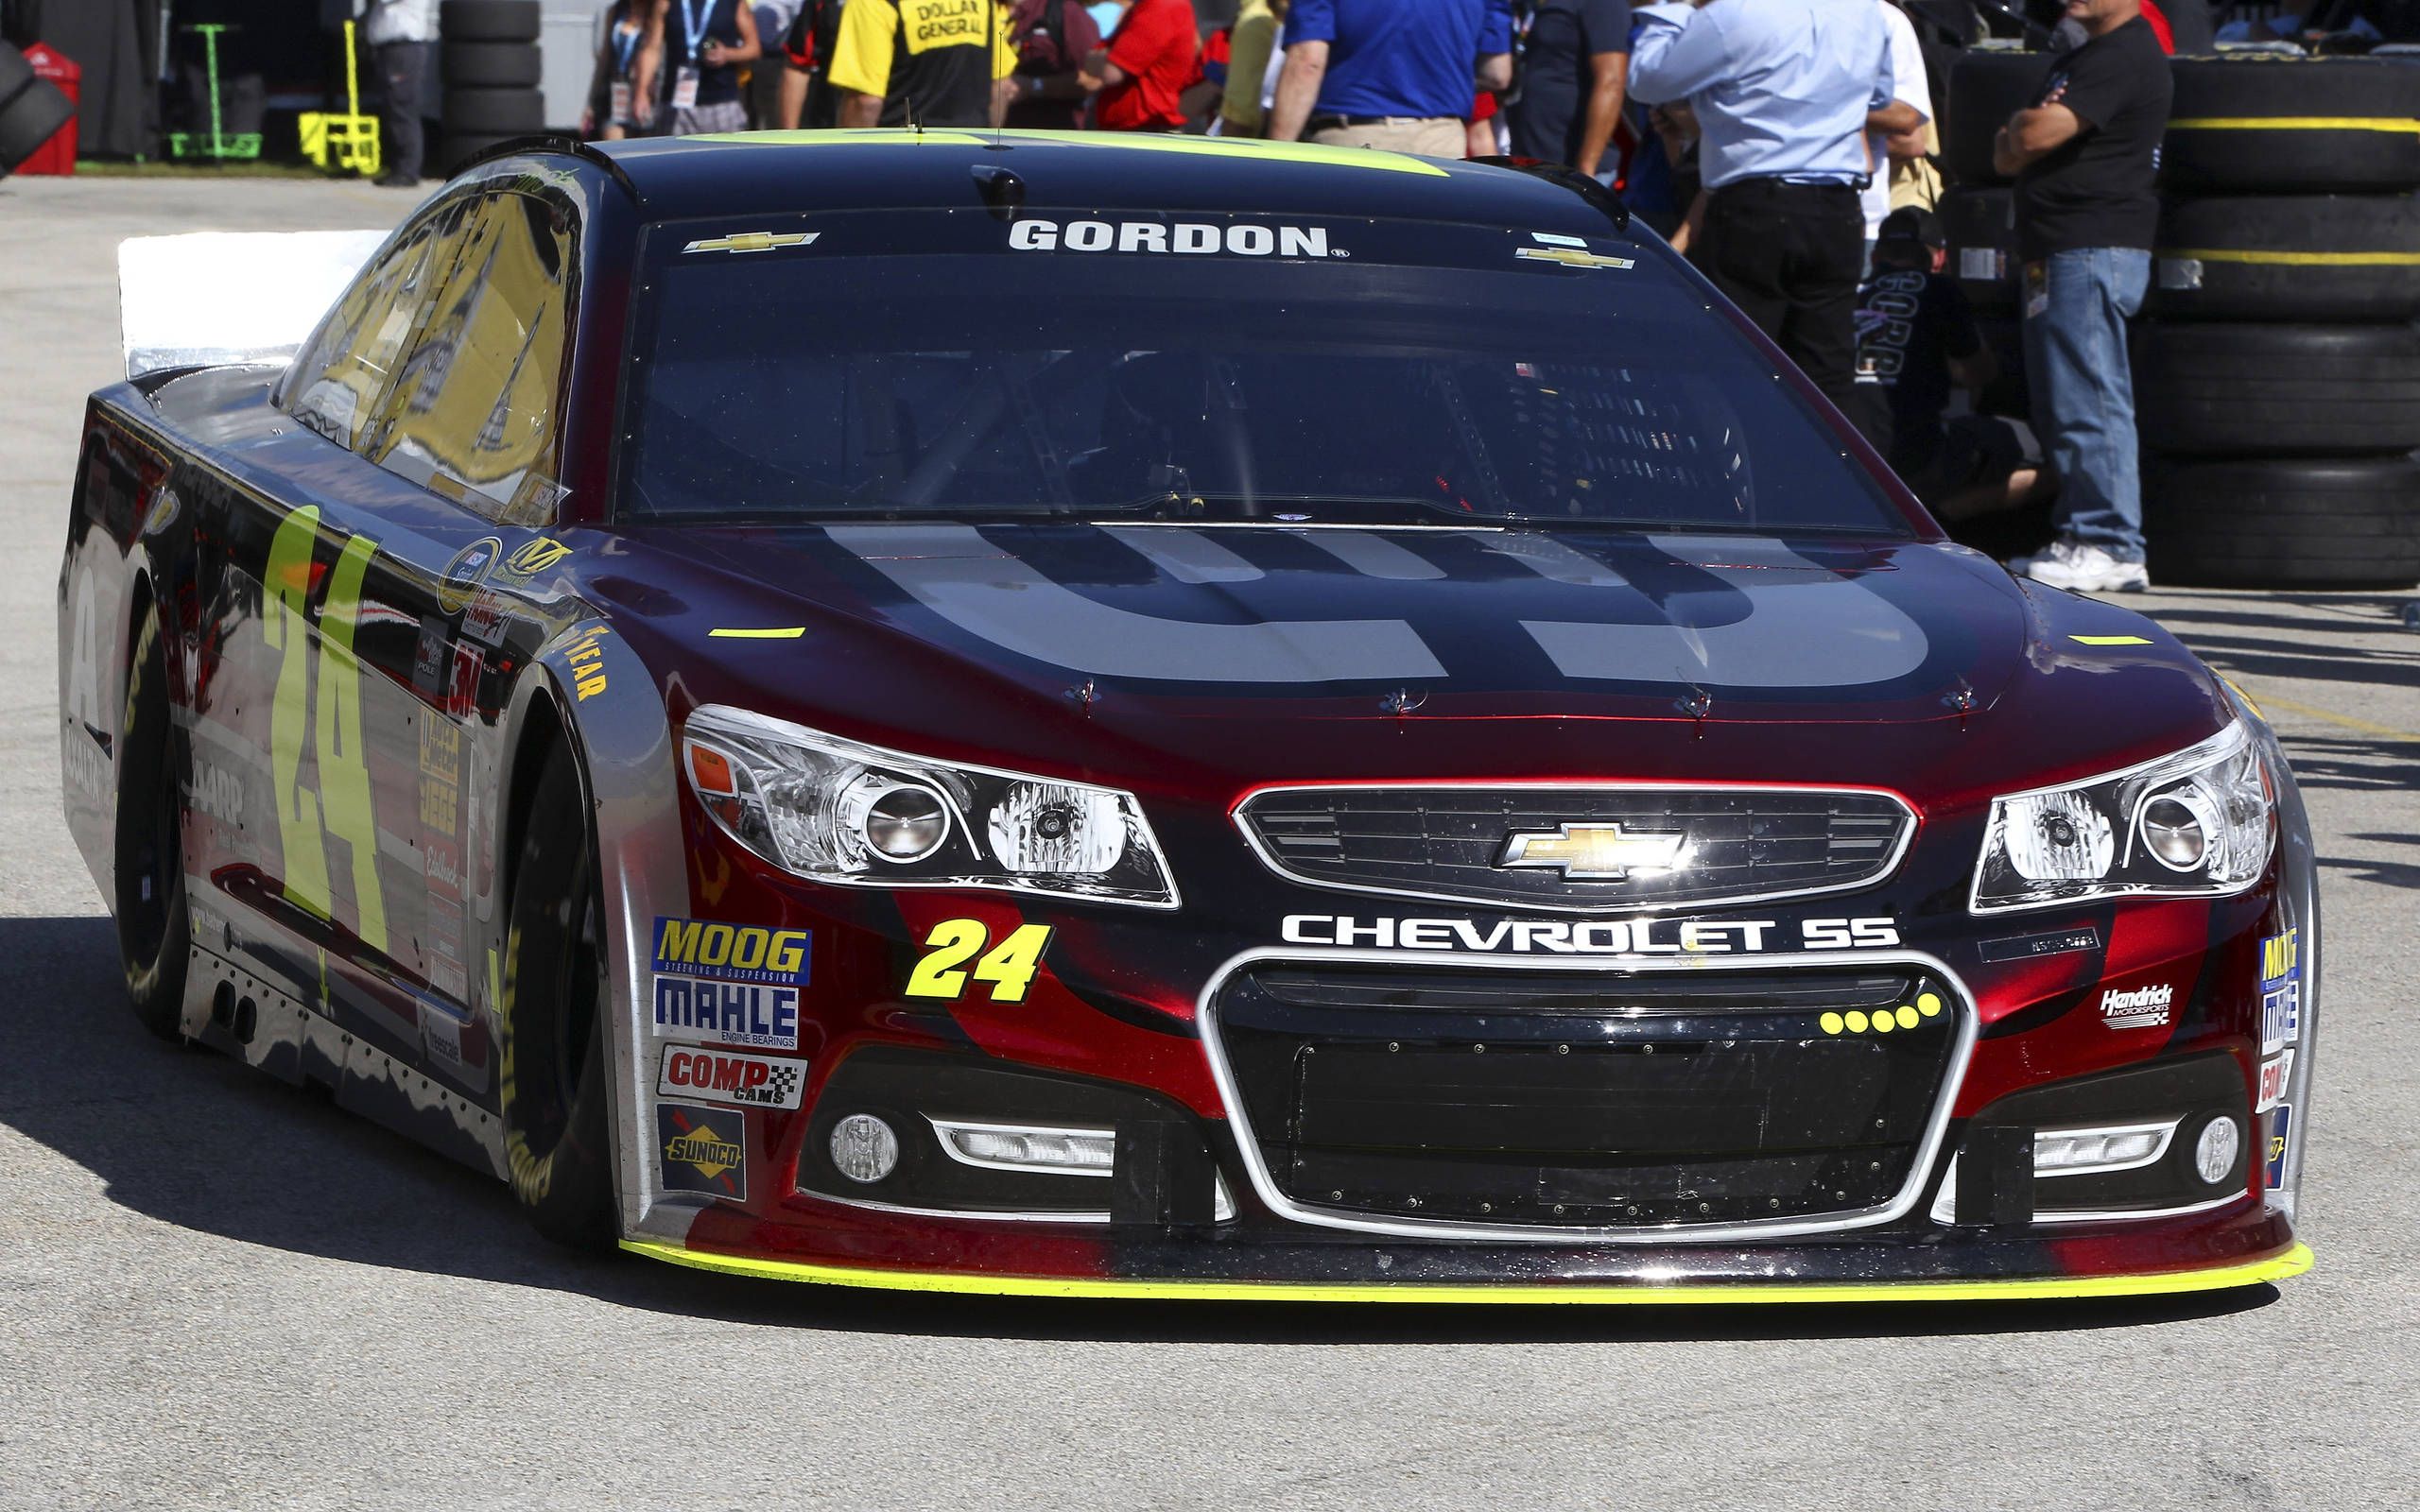 Jeff Gordon, Chevrolet win pole for NASCAR Chase finale at Homestead